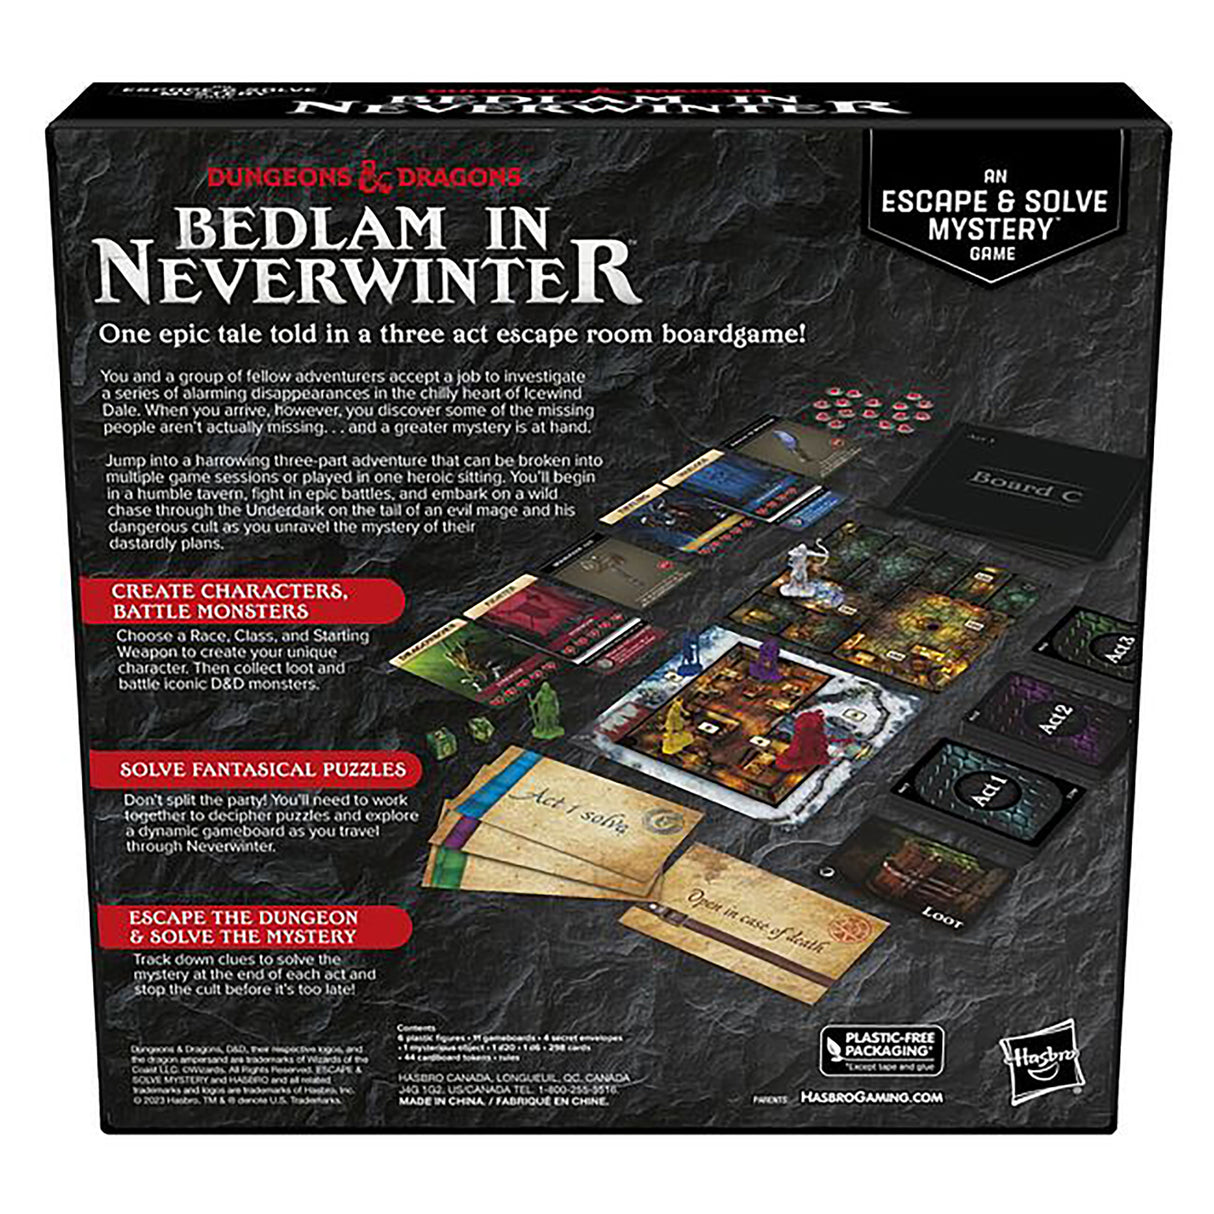 Dungeons & Dragons Bedlam In Neverwinter Game